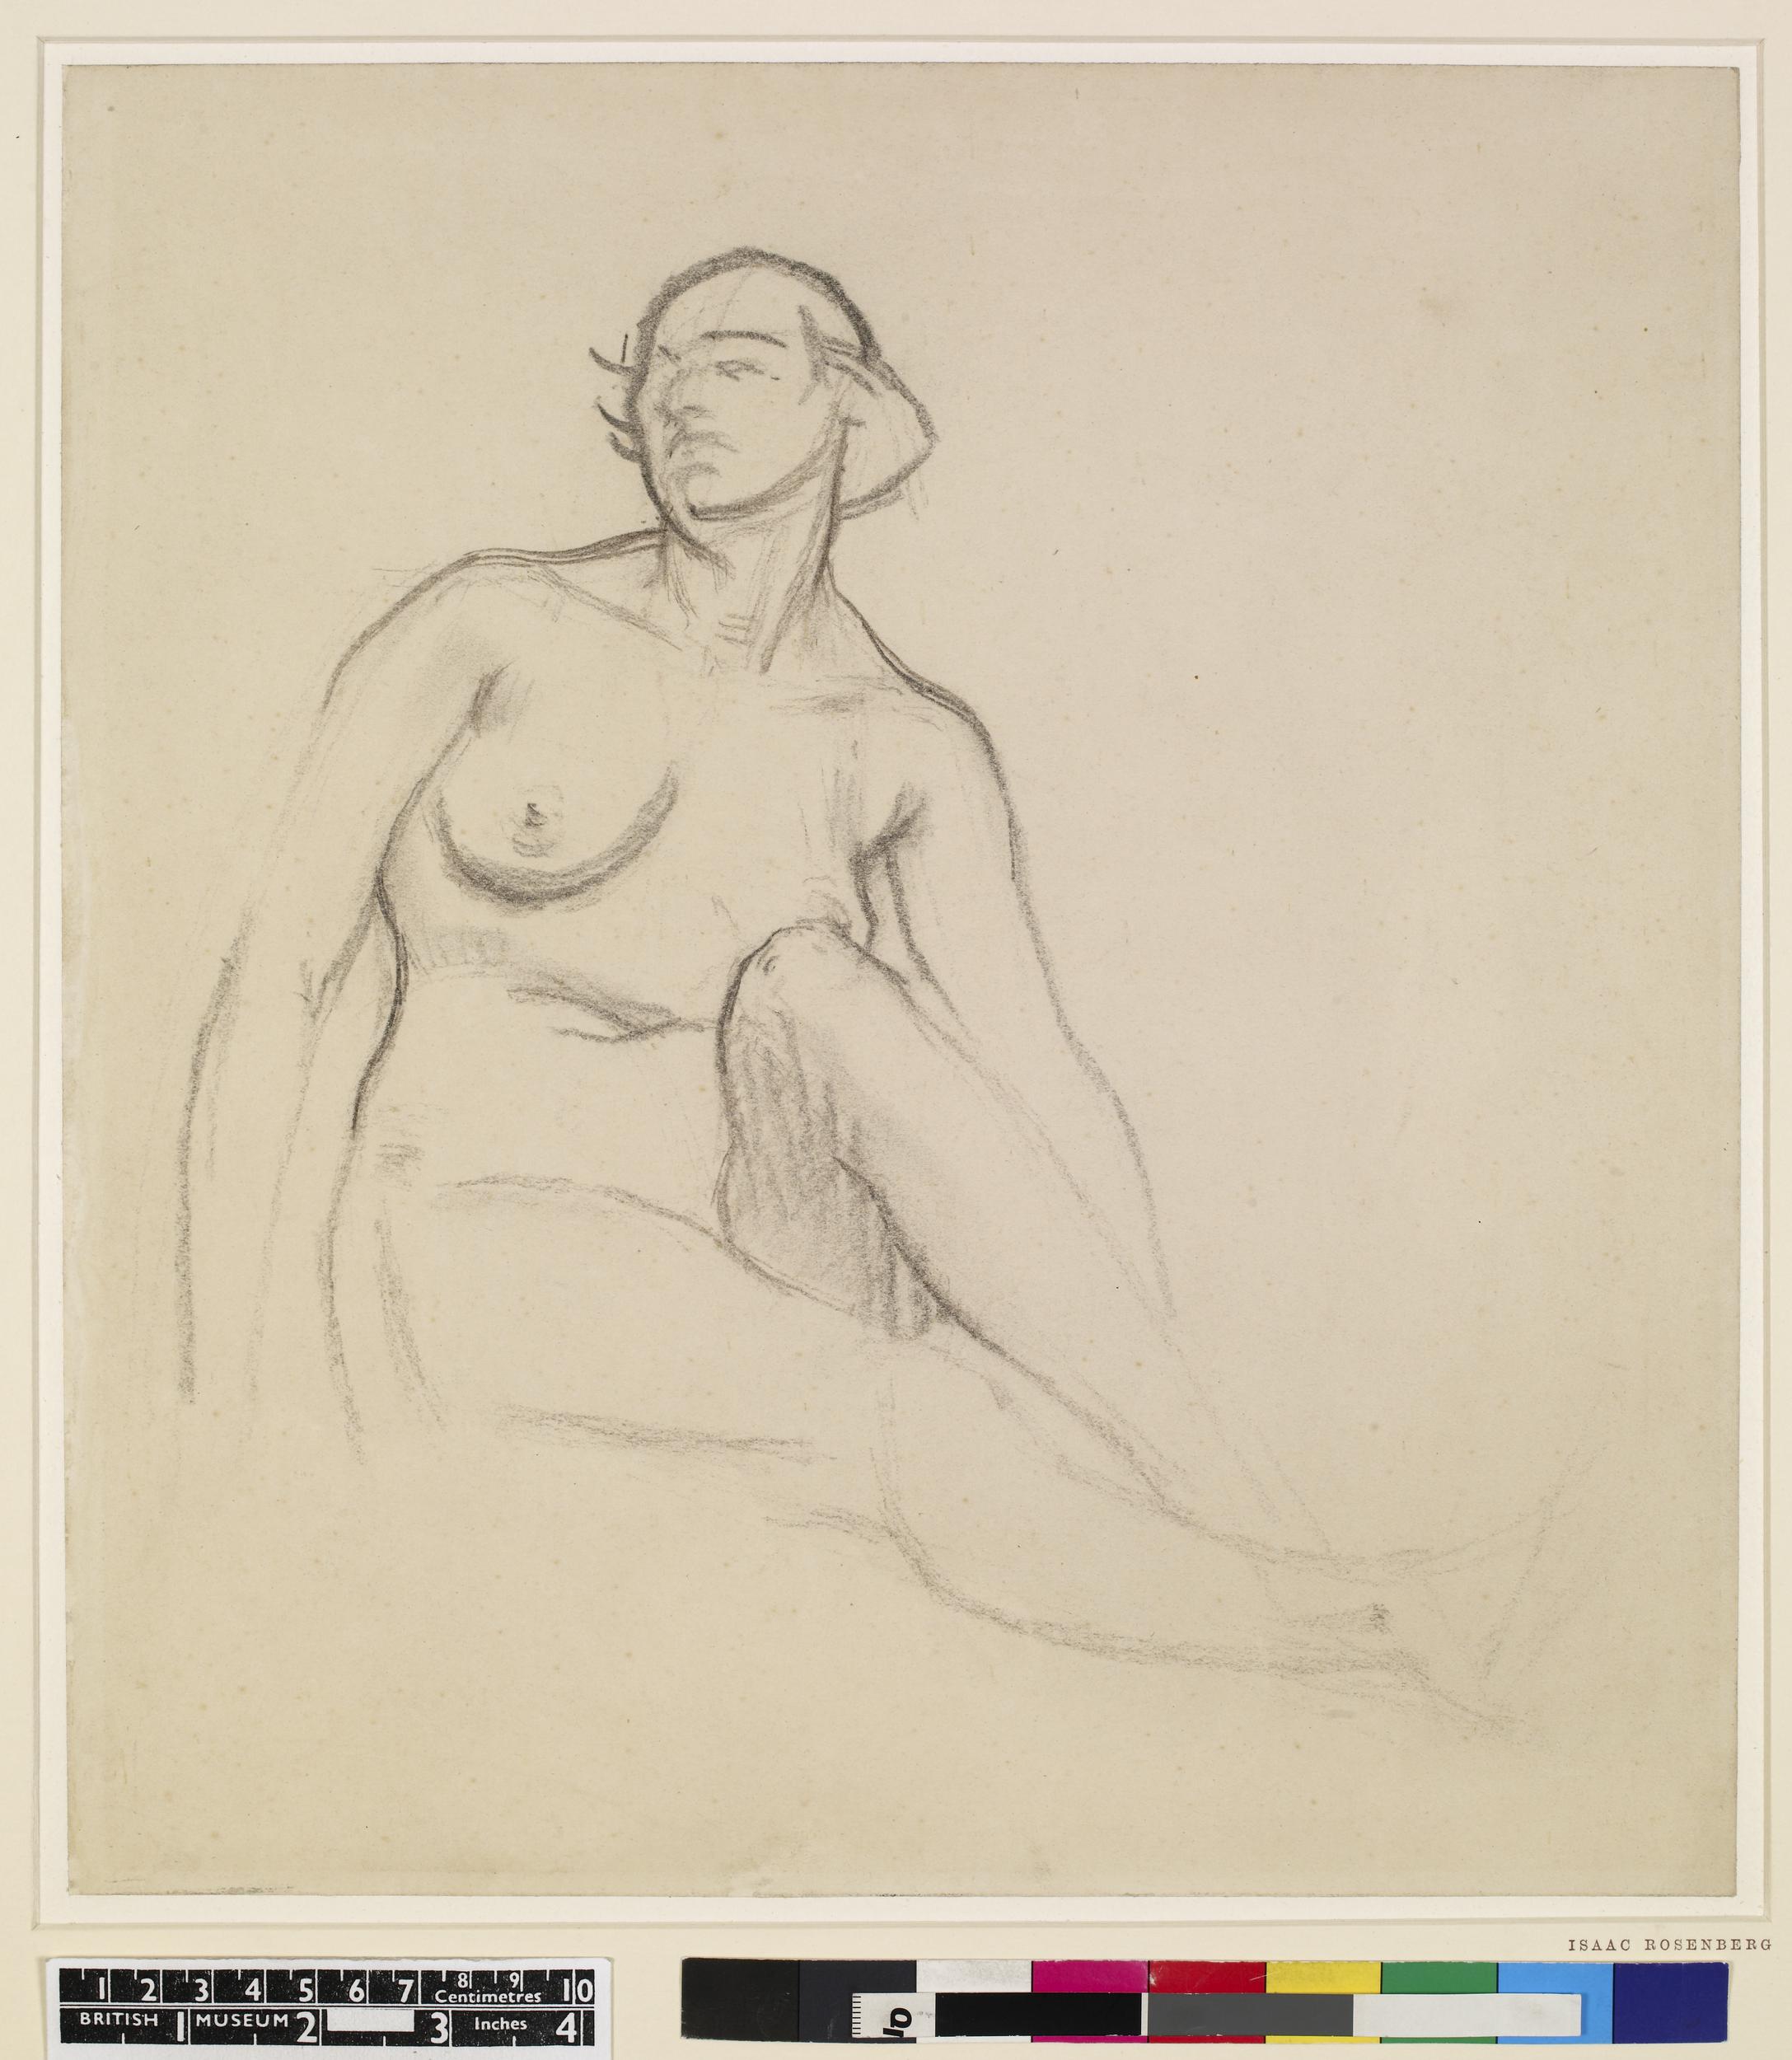 Study of a nude woman (1915)